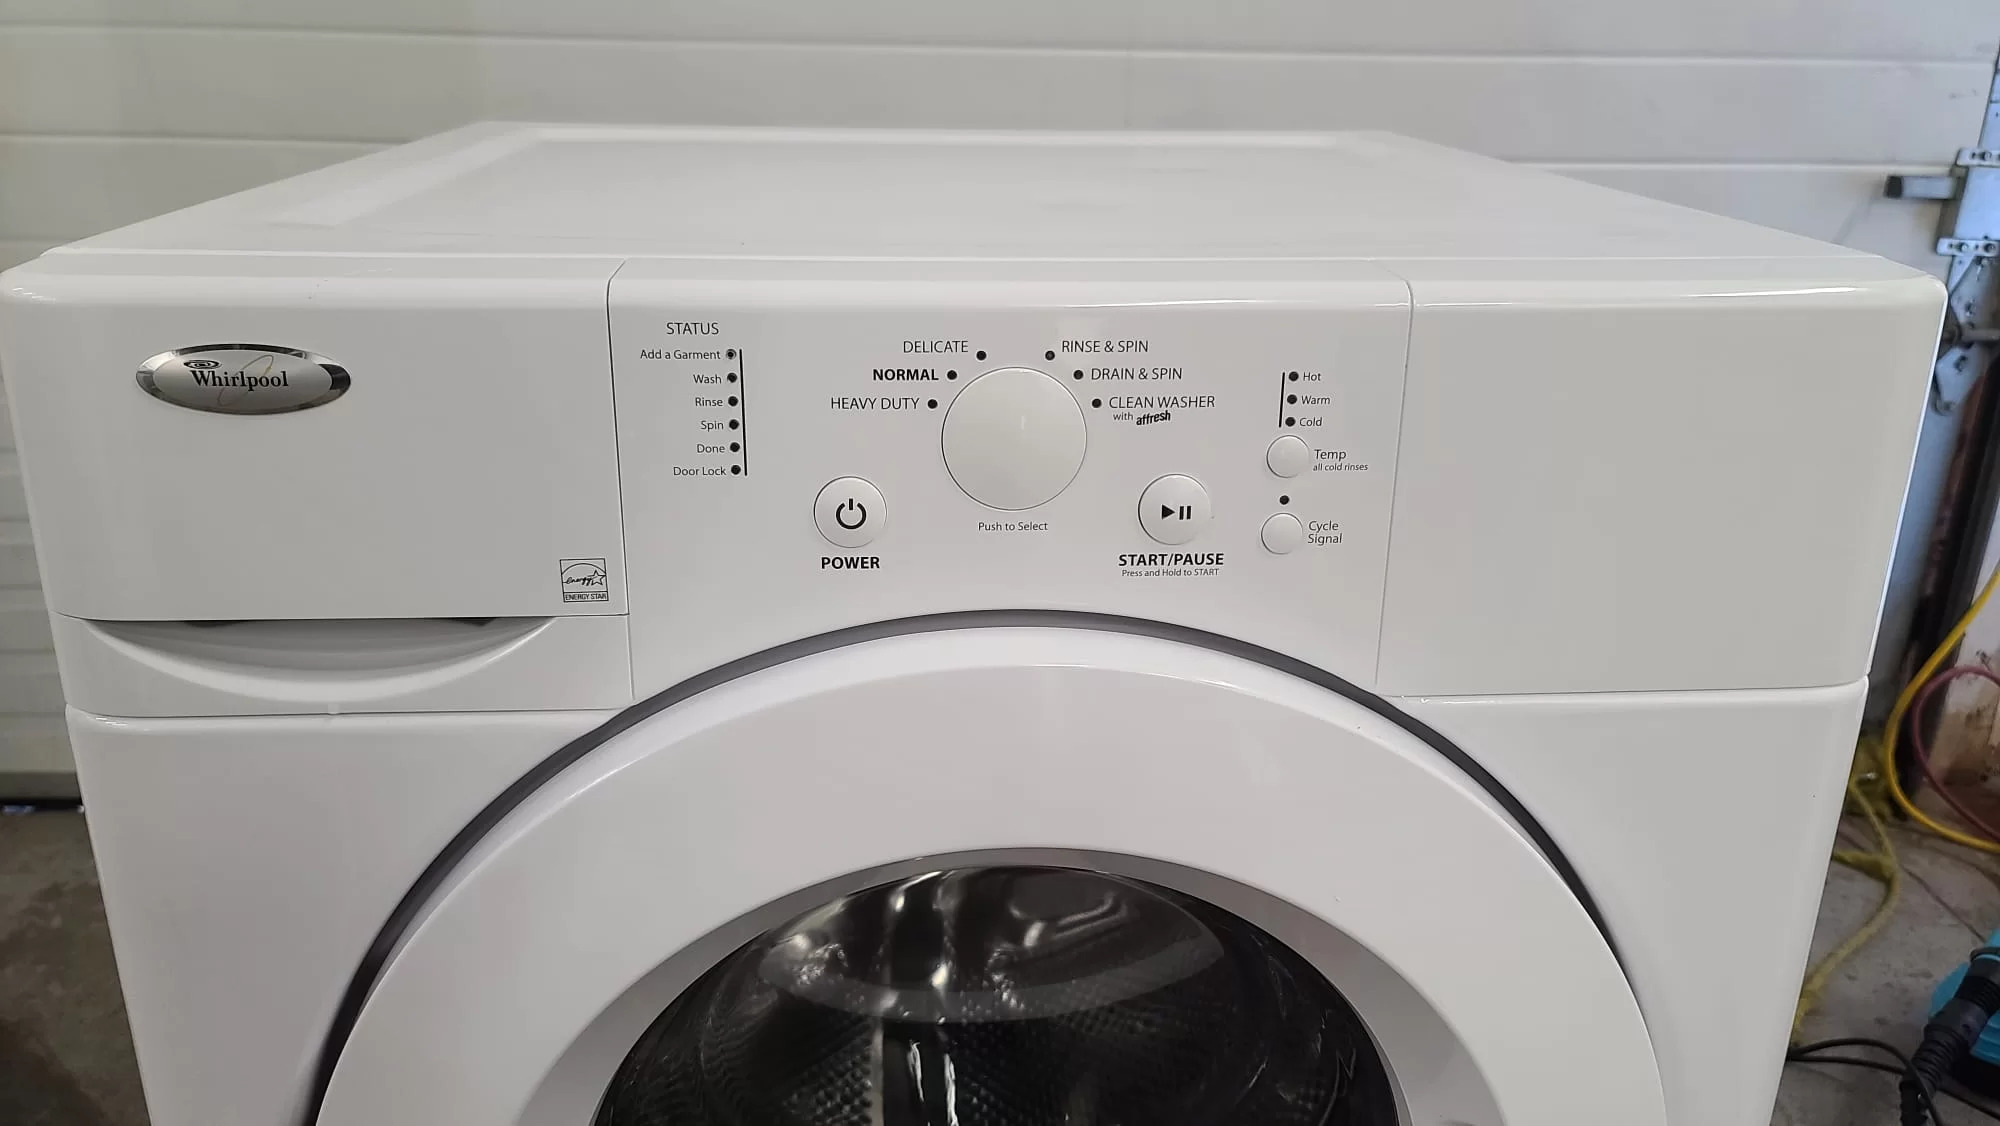 How To Fix The Error Code F10 For Whirlpool Washer